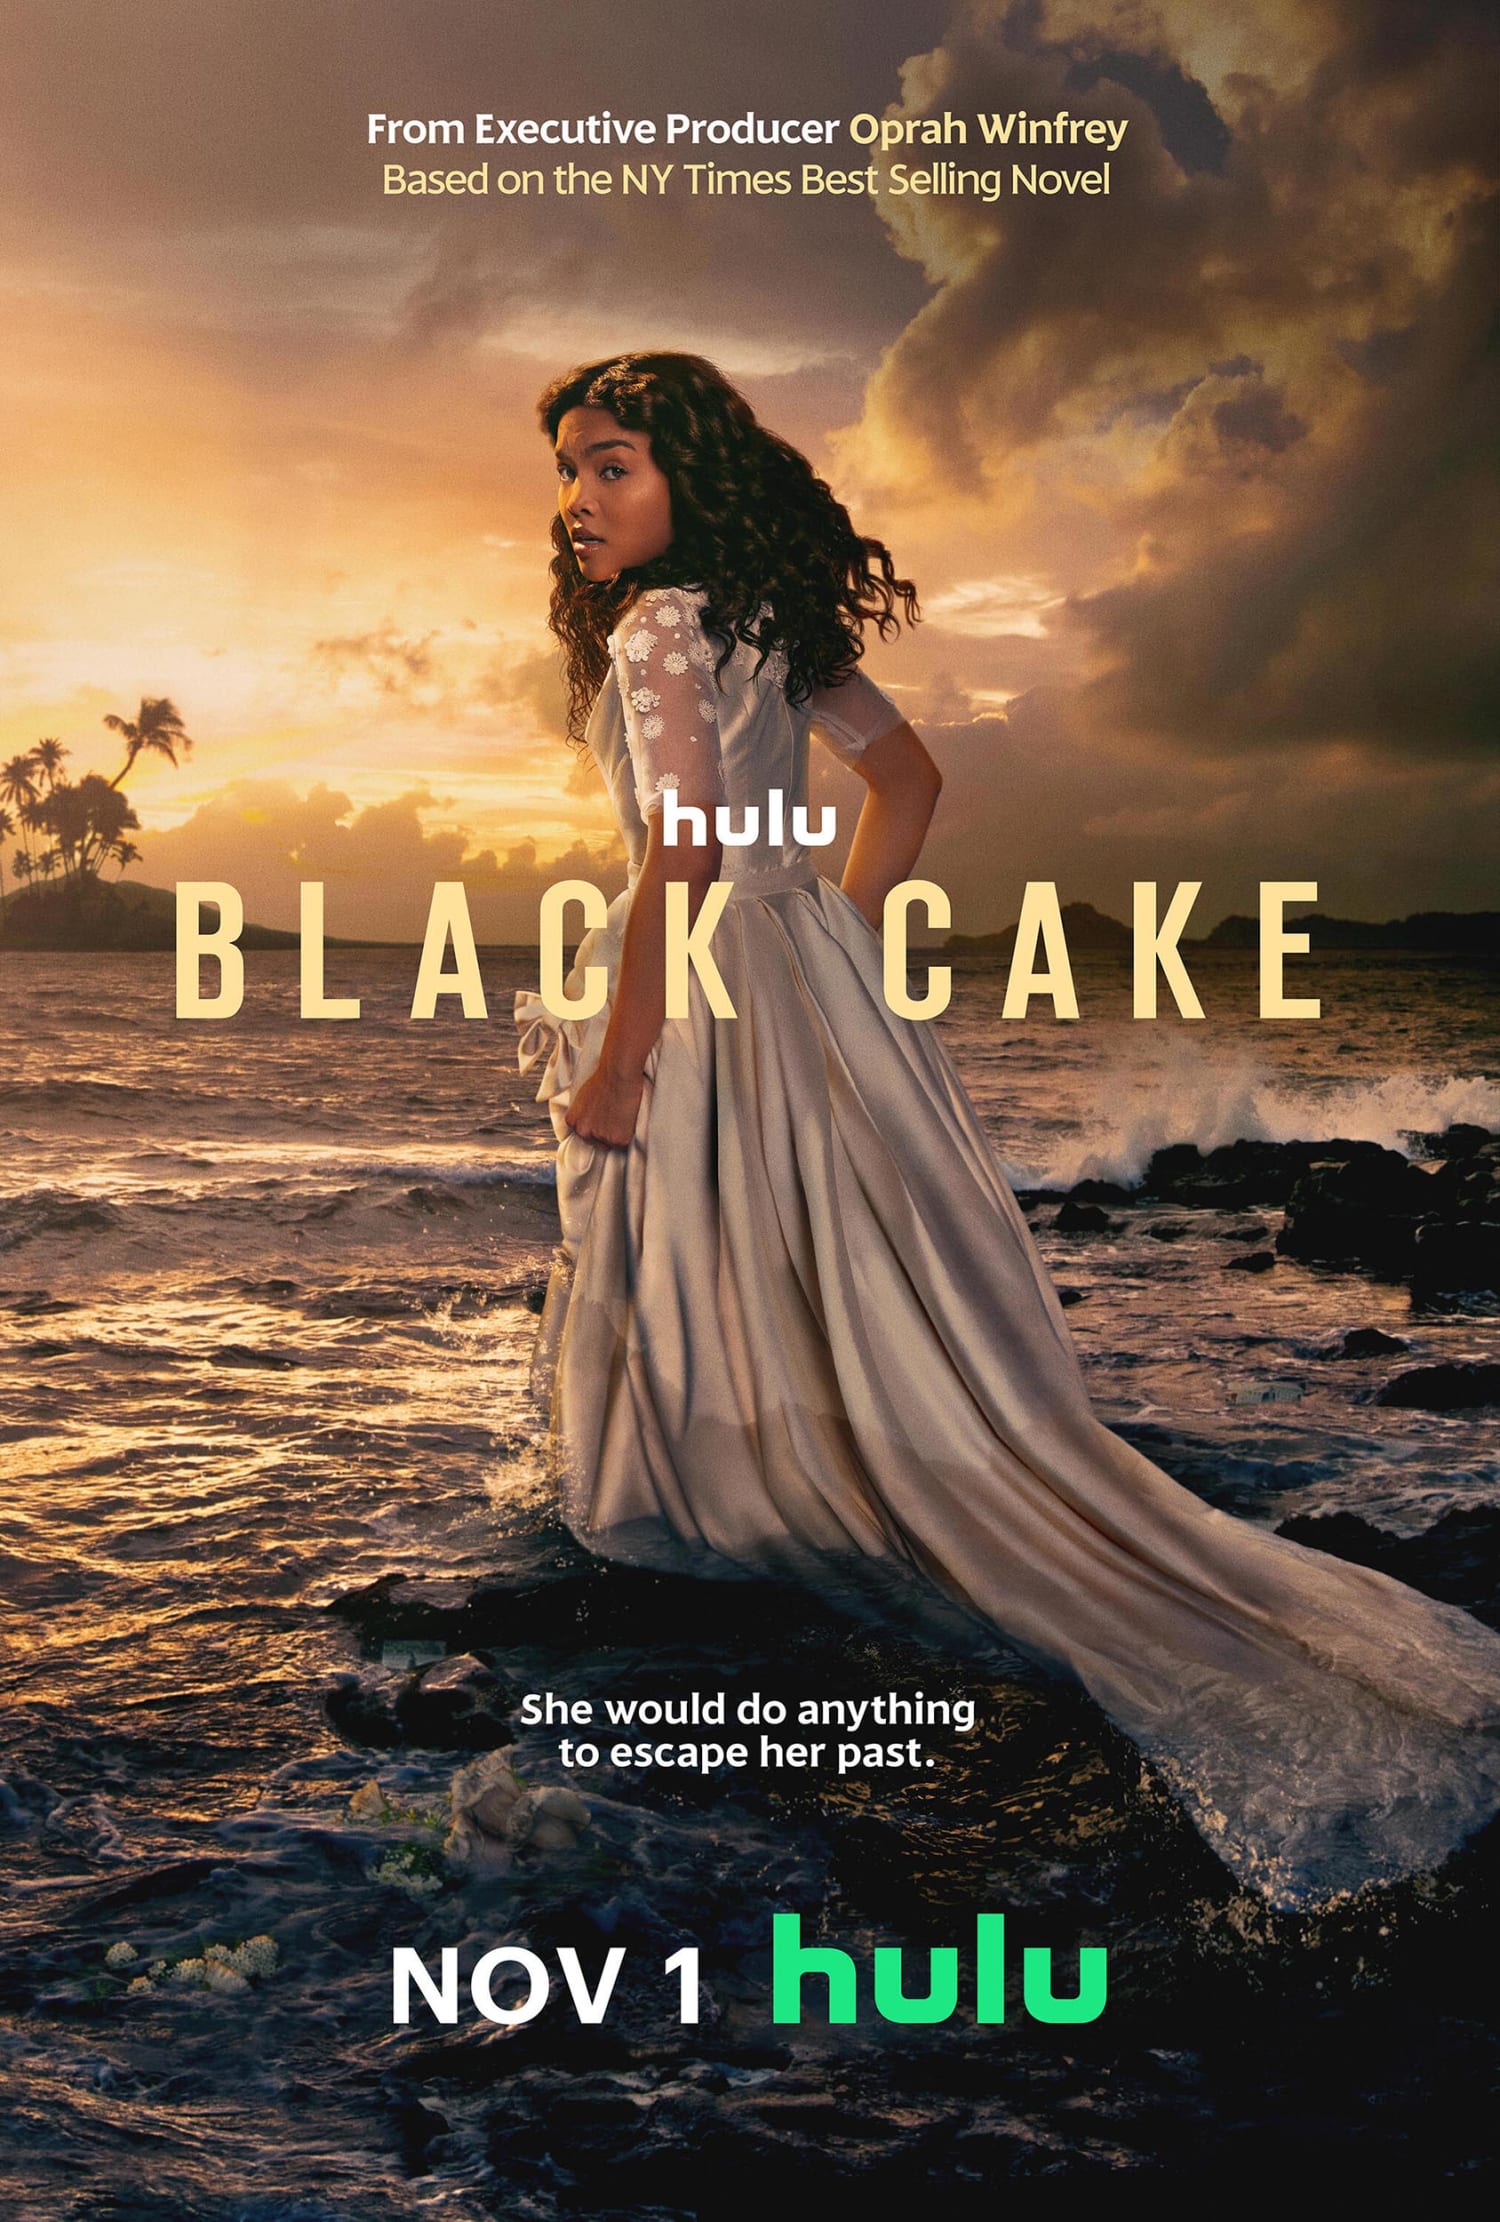 Exclusive: See The Trailer For 'Black Cake,' Hulu Show Based On RWJ Book